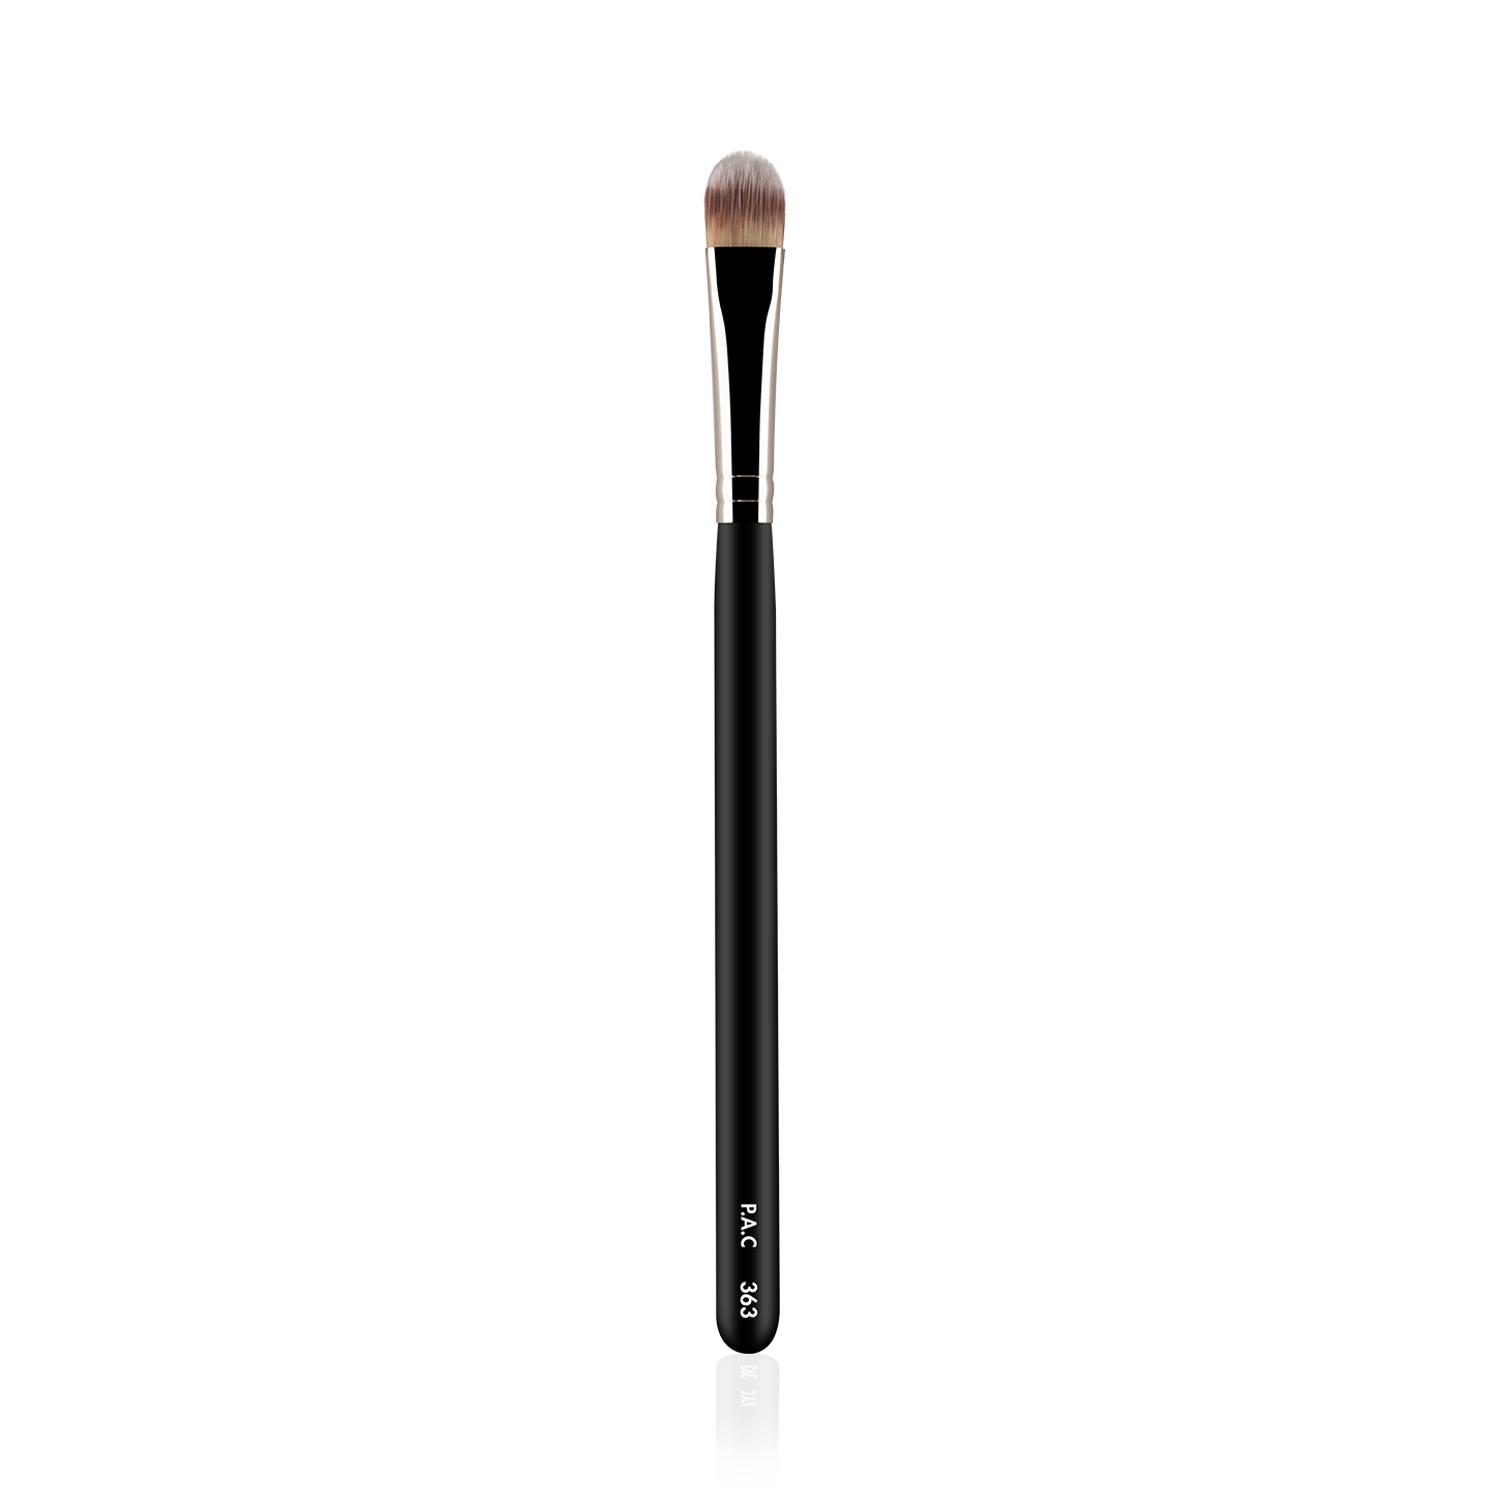 PAC | PAC Concealer Brush - 363 (1Pc)